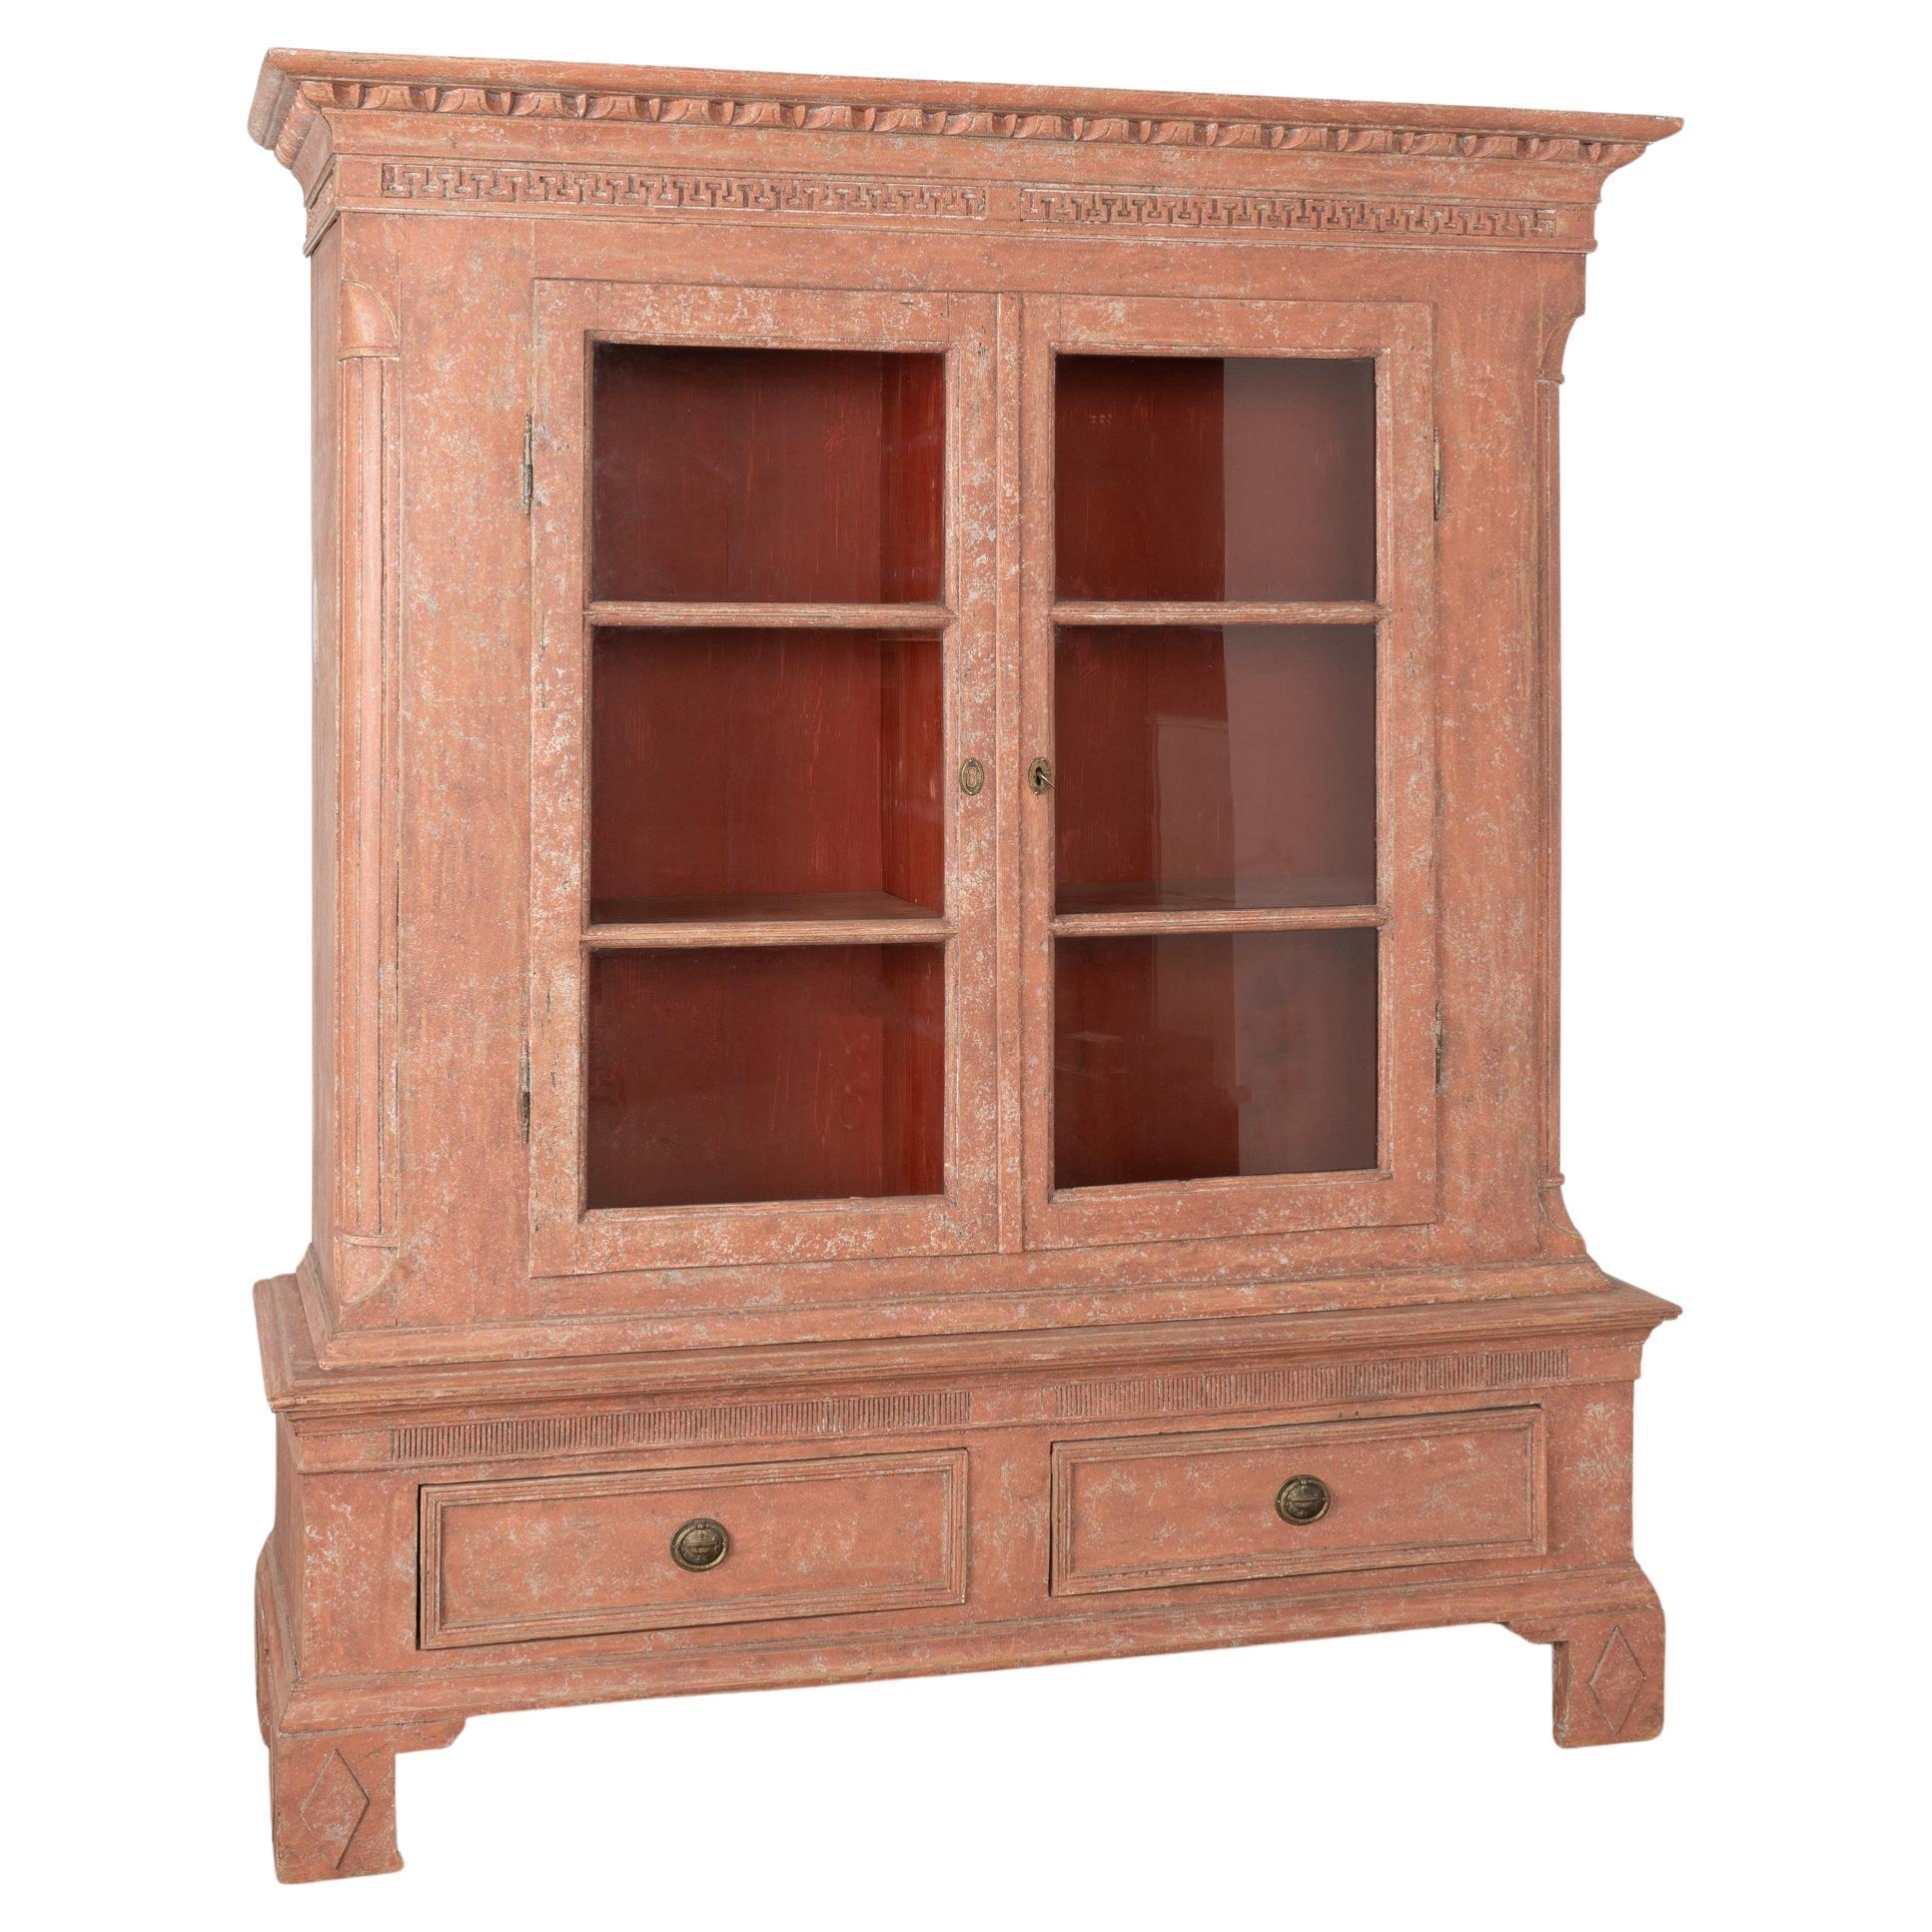 Red Painted Gustavian Bookcase Display Cabinet, Sweden circa 1790-1820 For Sale